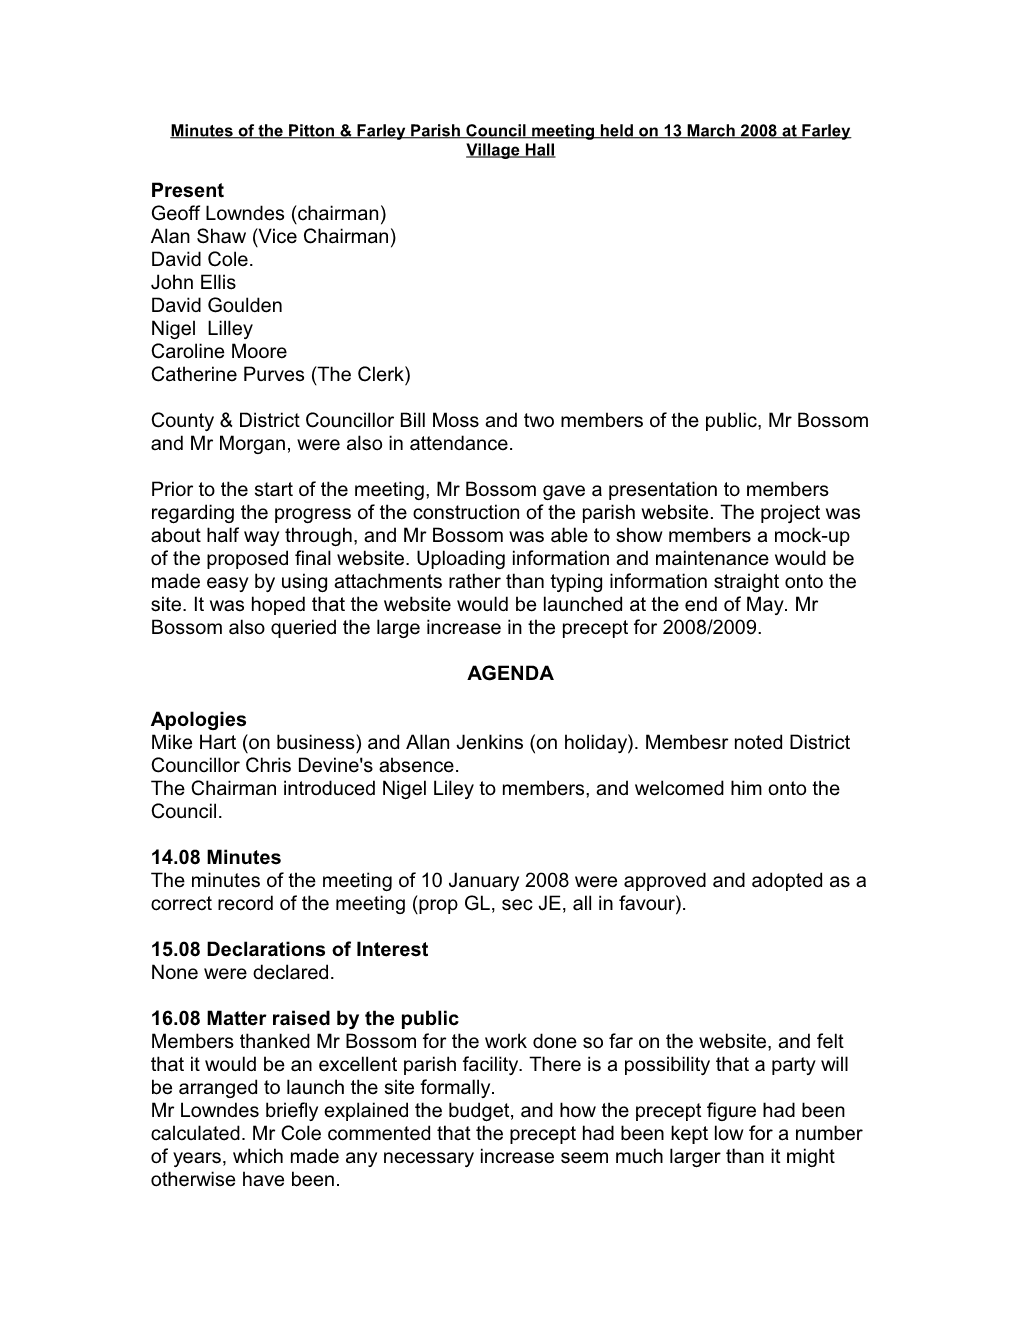 Minutes of the Pitton & Farley Parish Council Meeting Held on 13 March 2008 at Farley Village